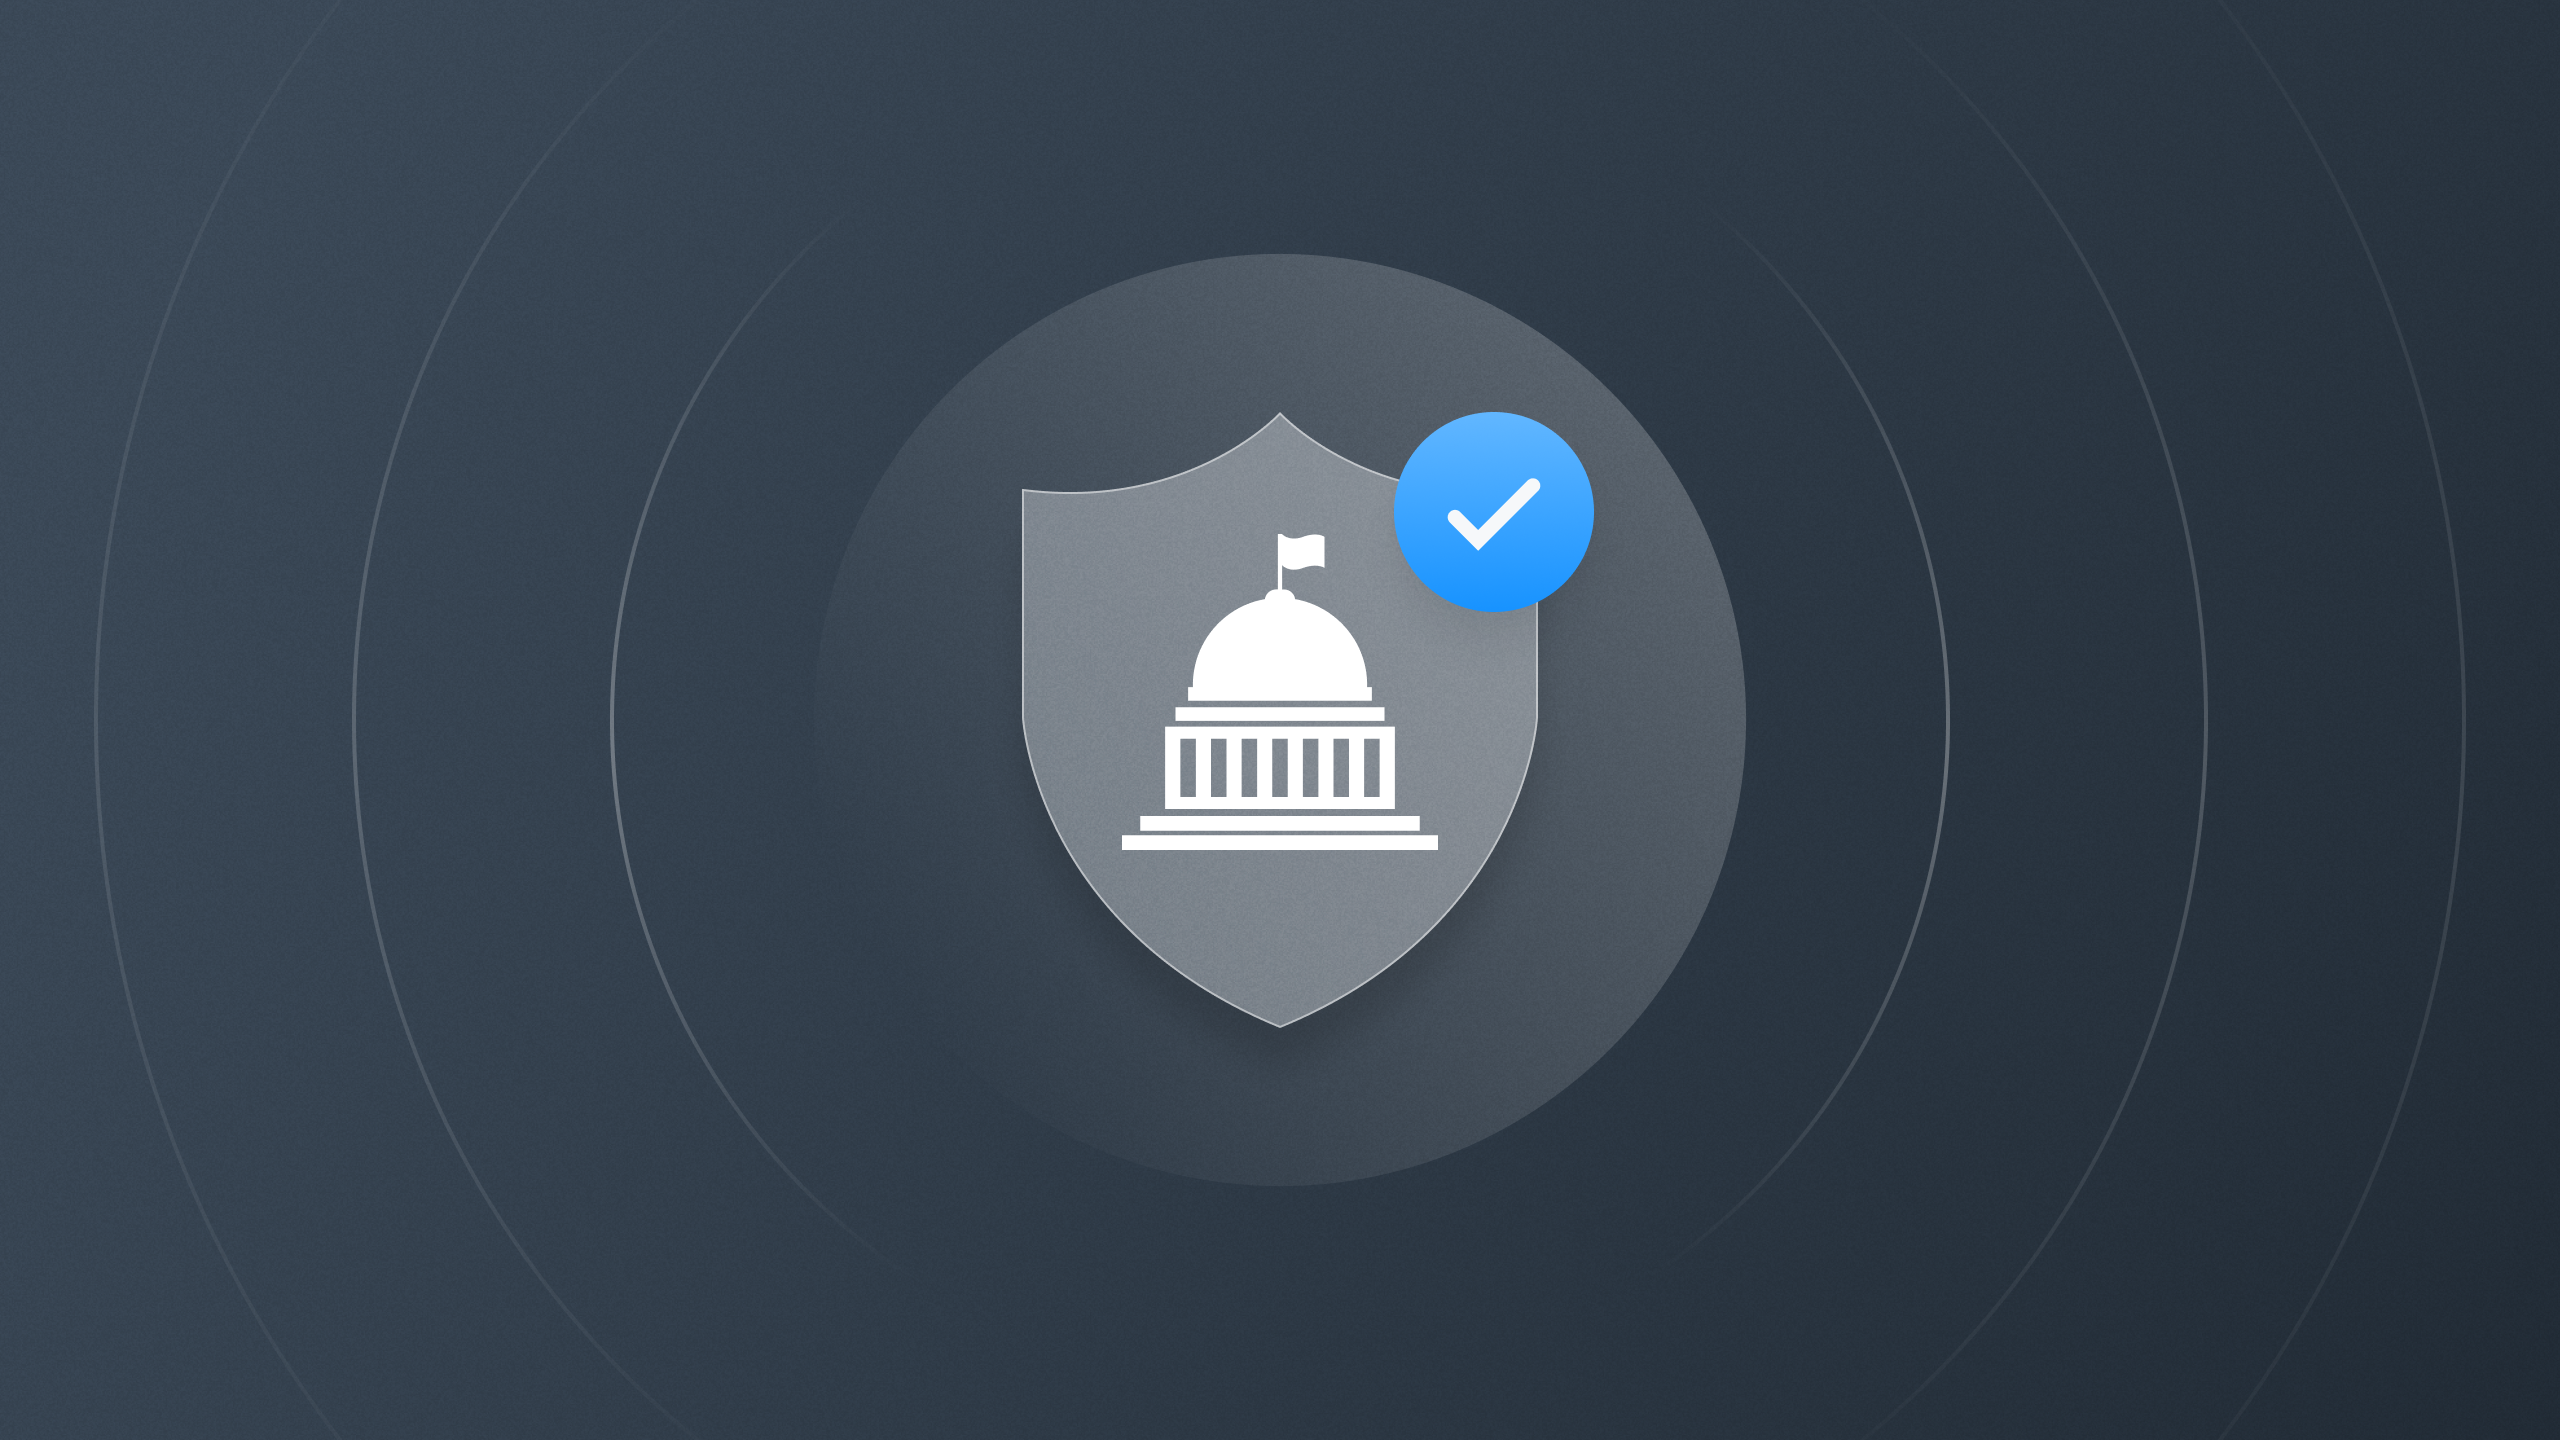 List 13 states with comprehensive privacy laws